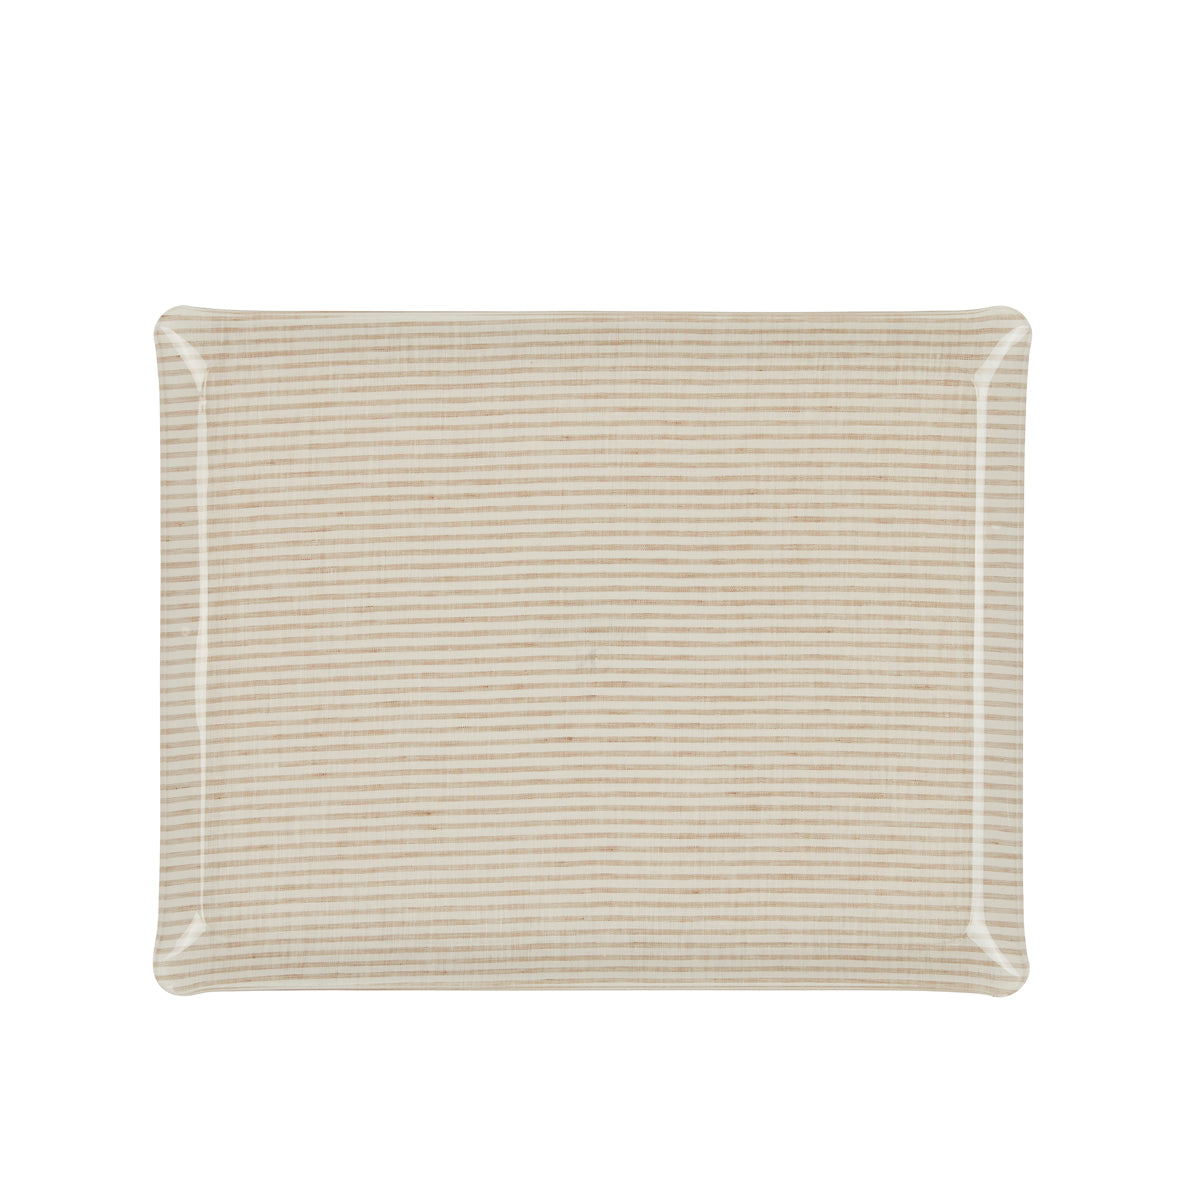 Nina Campbell Fabric Tray - Stripe Beige and White